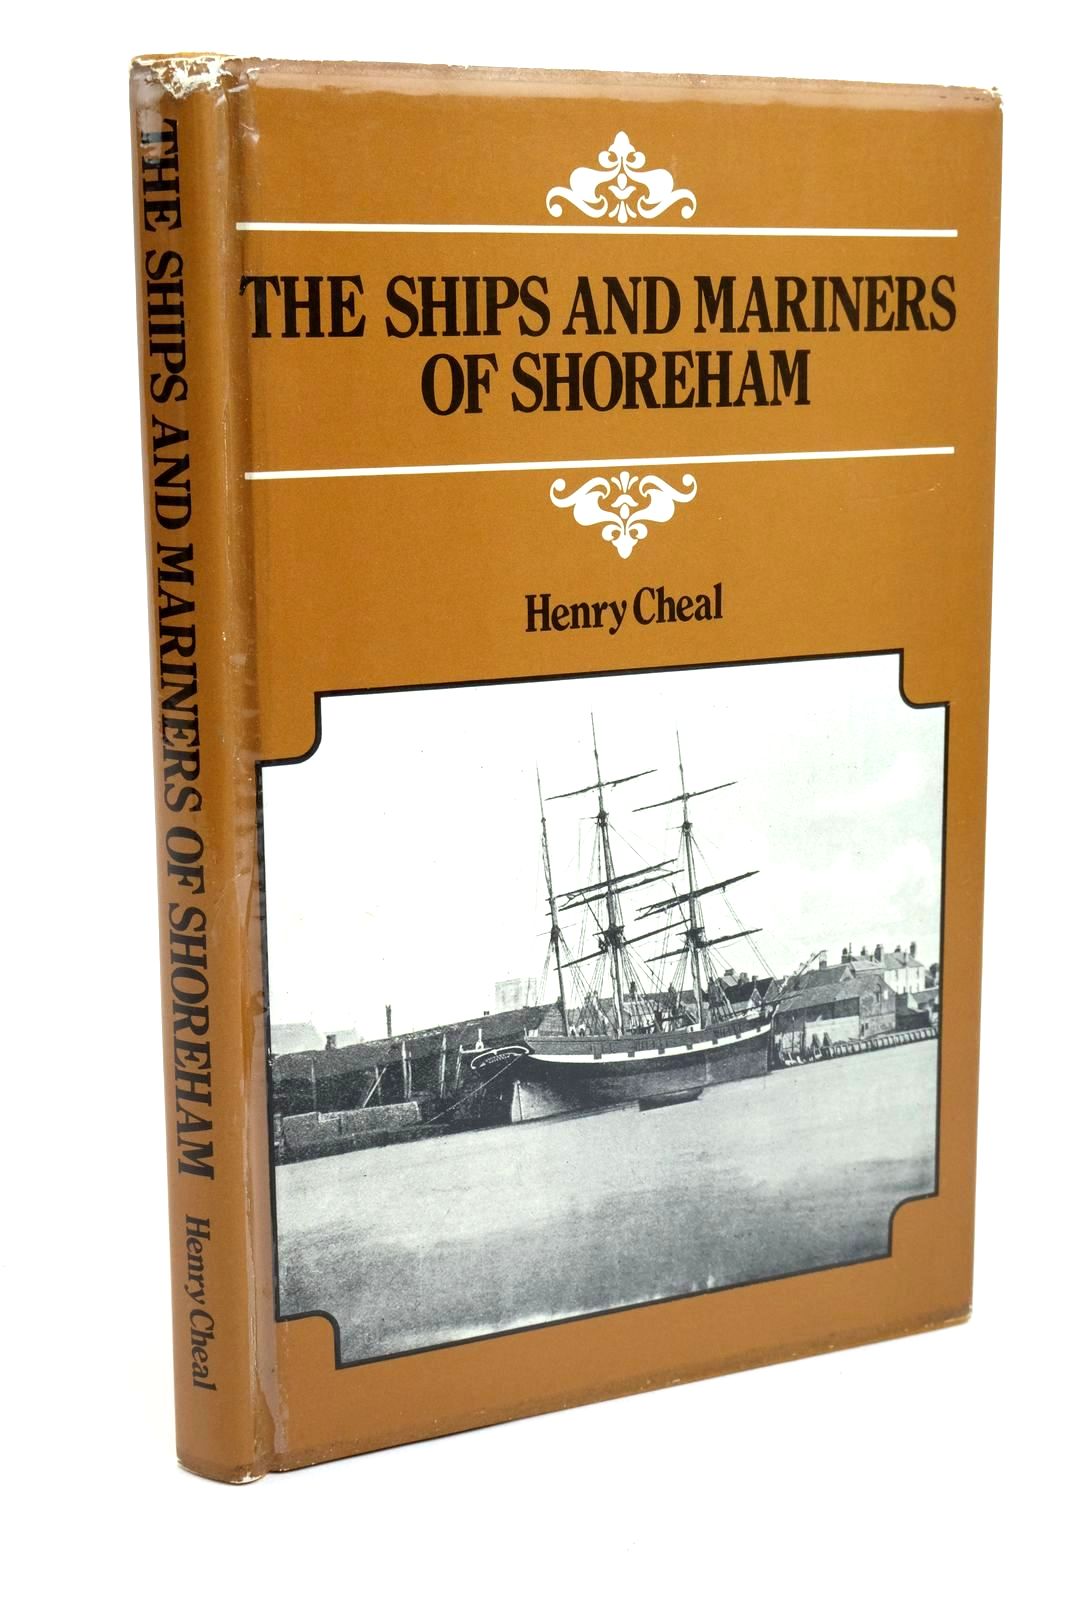 Photo of THE SHIPS AND MARINERS OF SHOREHAM written by Cheal, Henry published by G.E. & P.P. Bysh (STOCK CODE: 1322297)  for sale by Stella & Rose's Books